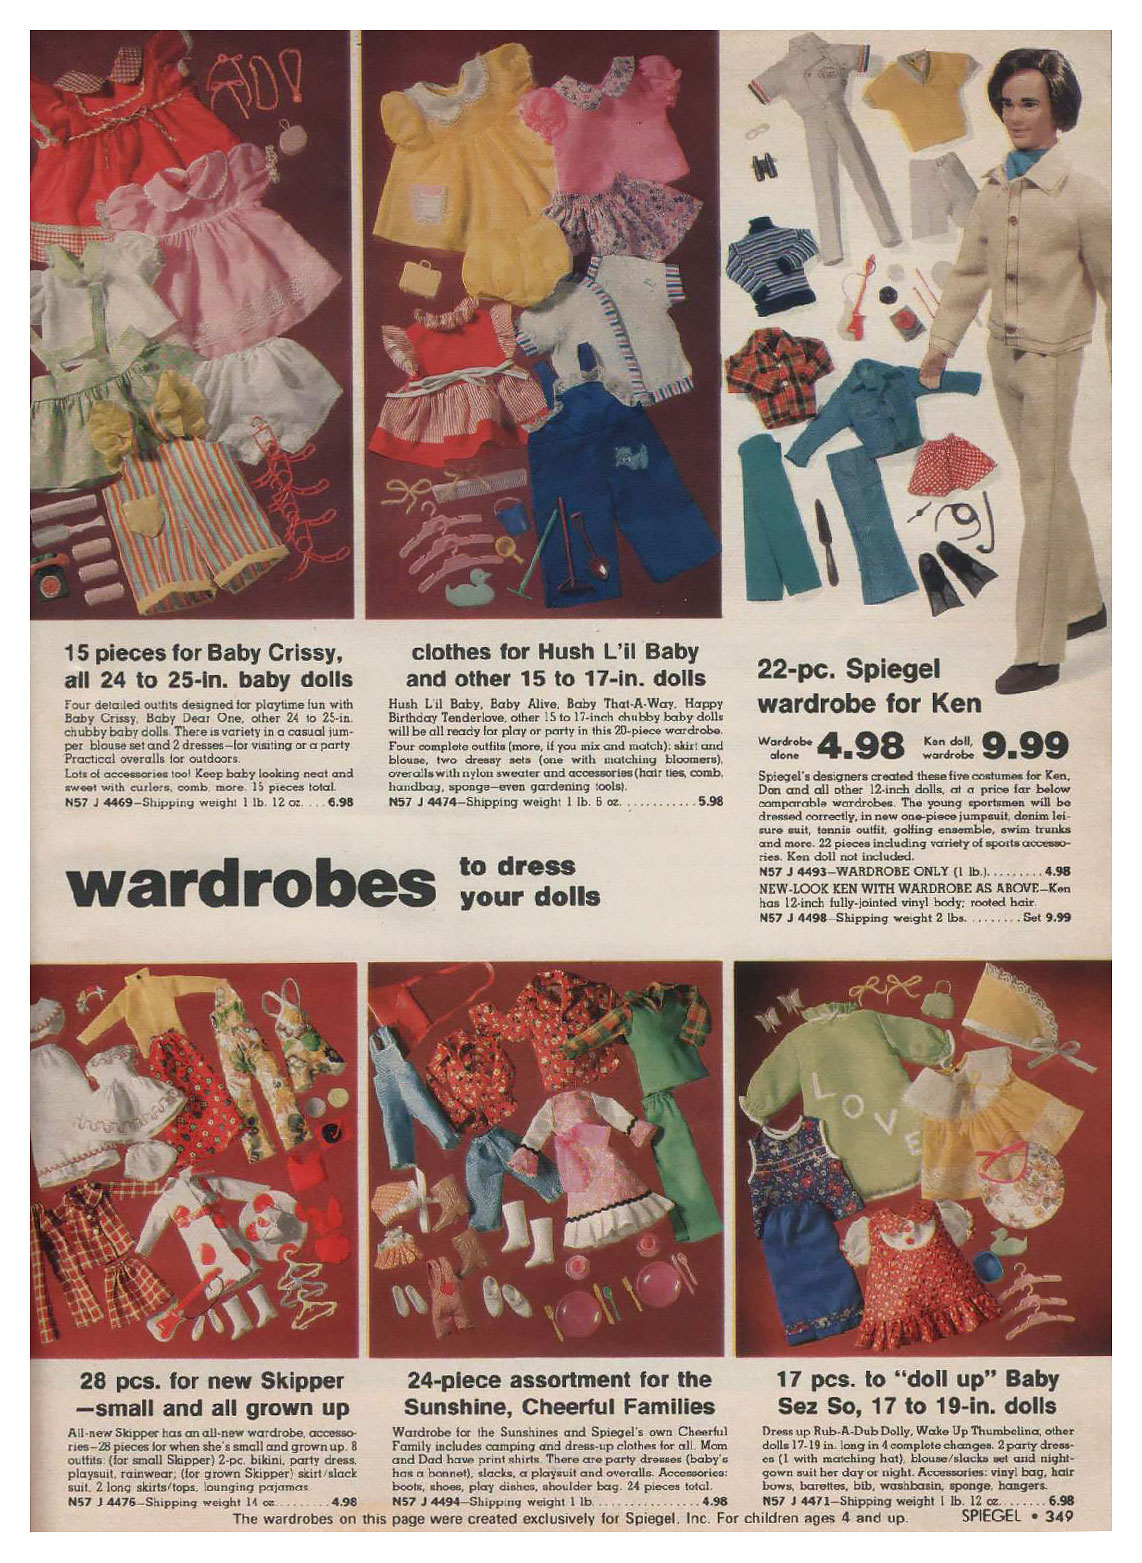 From 1976 Spiegel Christmas catalogue